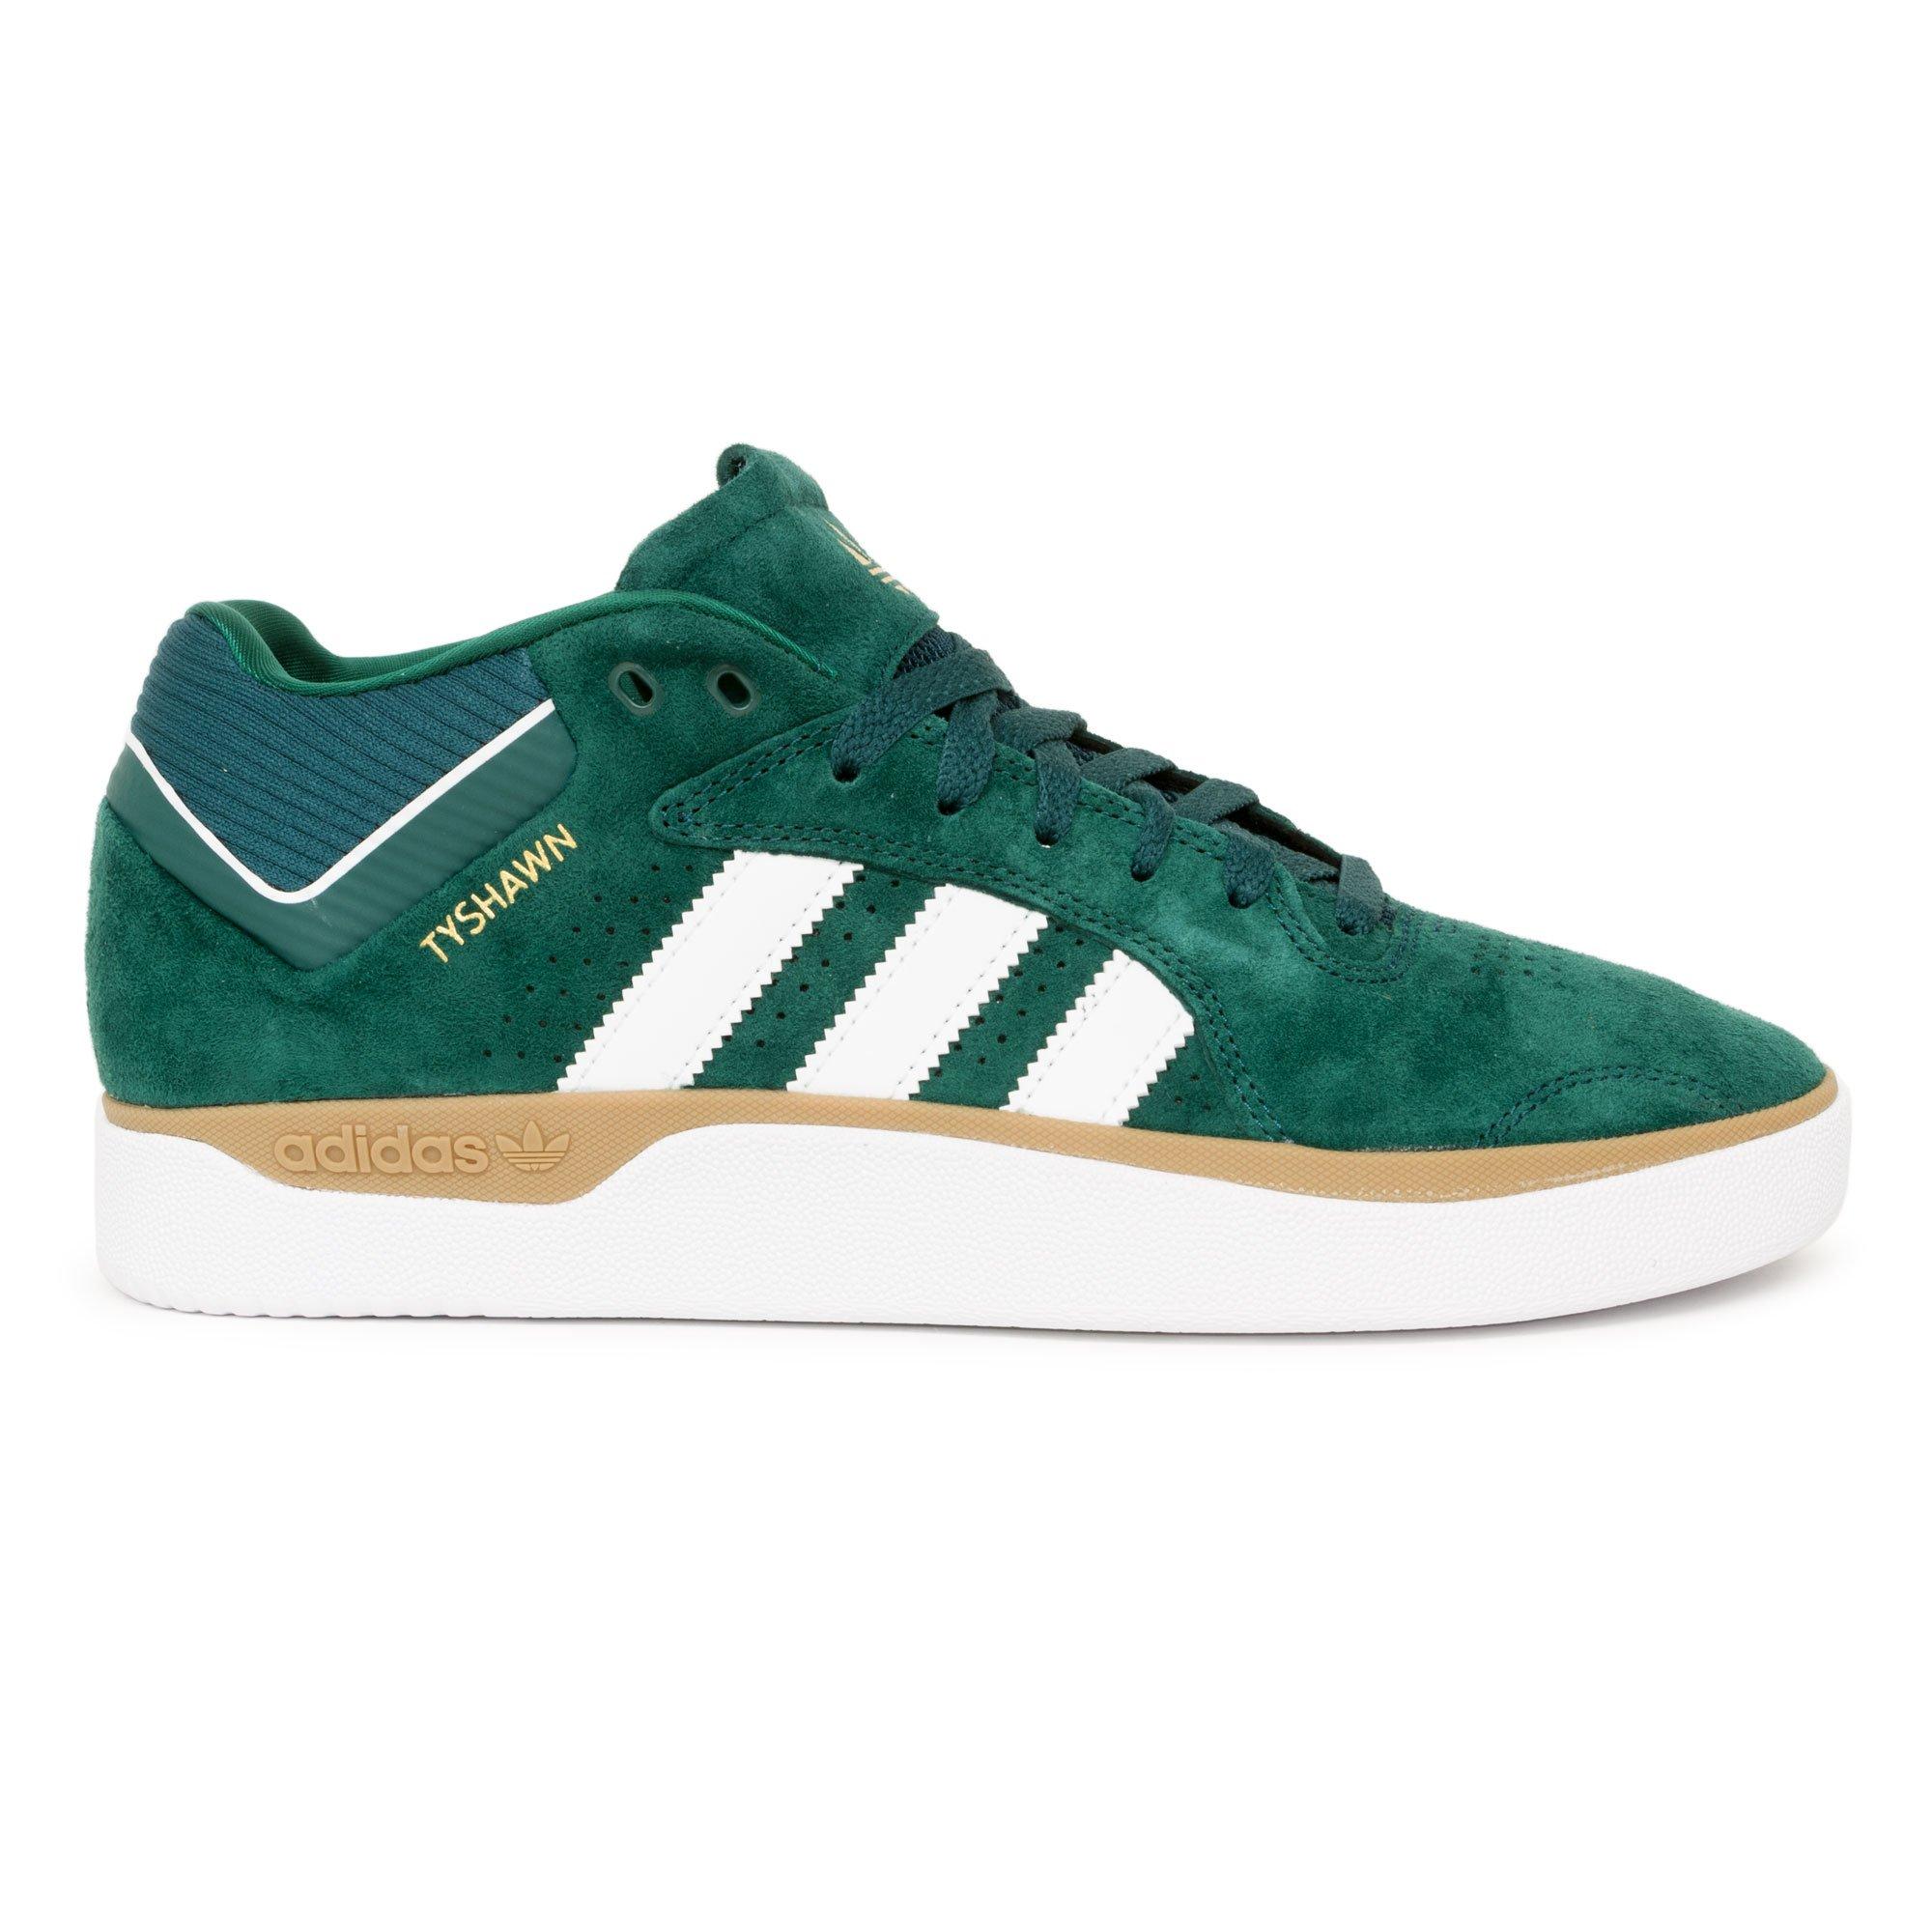 adidas Suede Tyshawn Shoes in Green for Men - Lyst